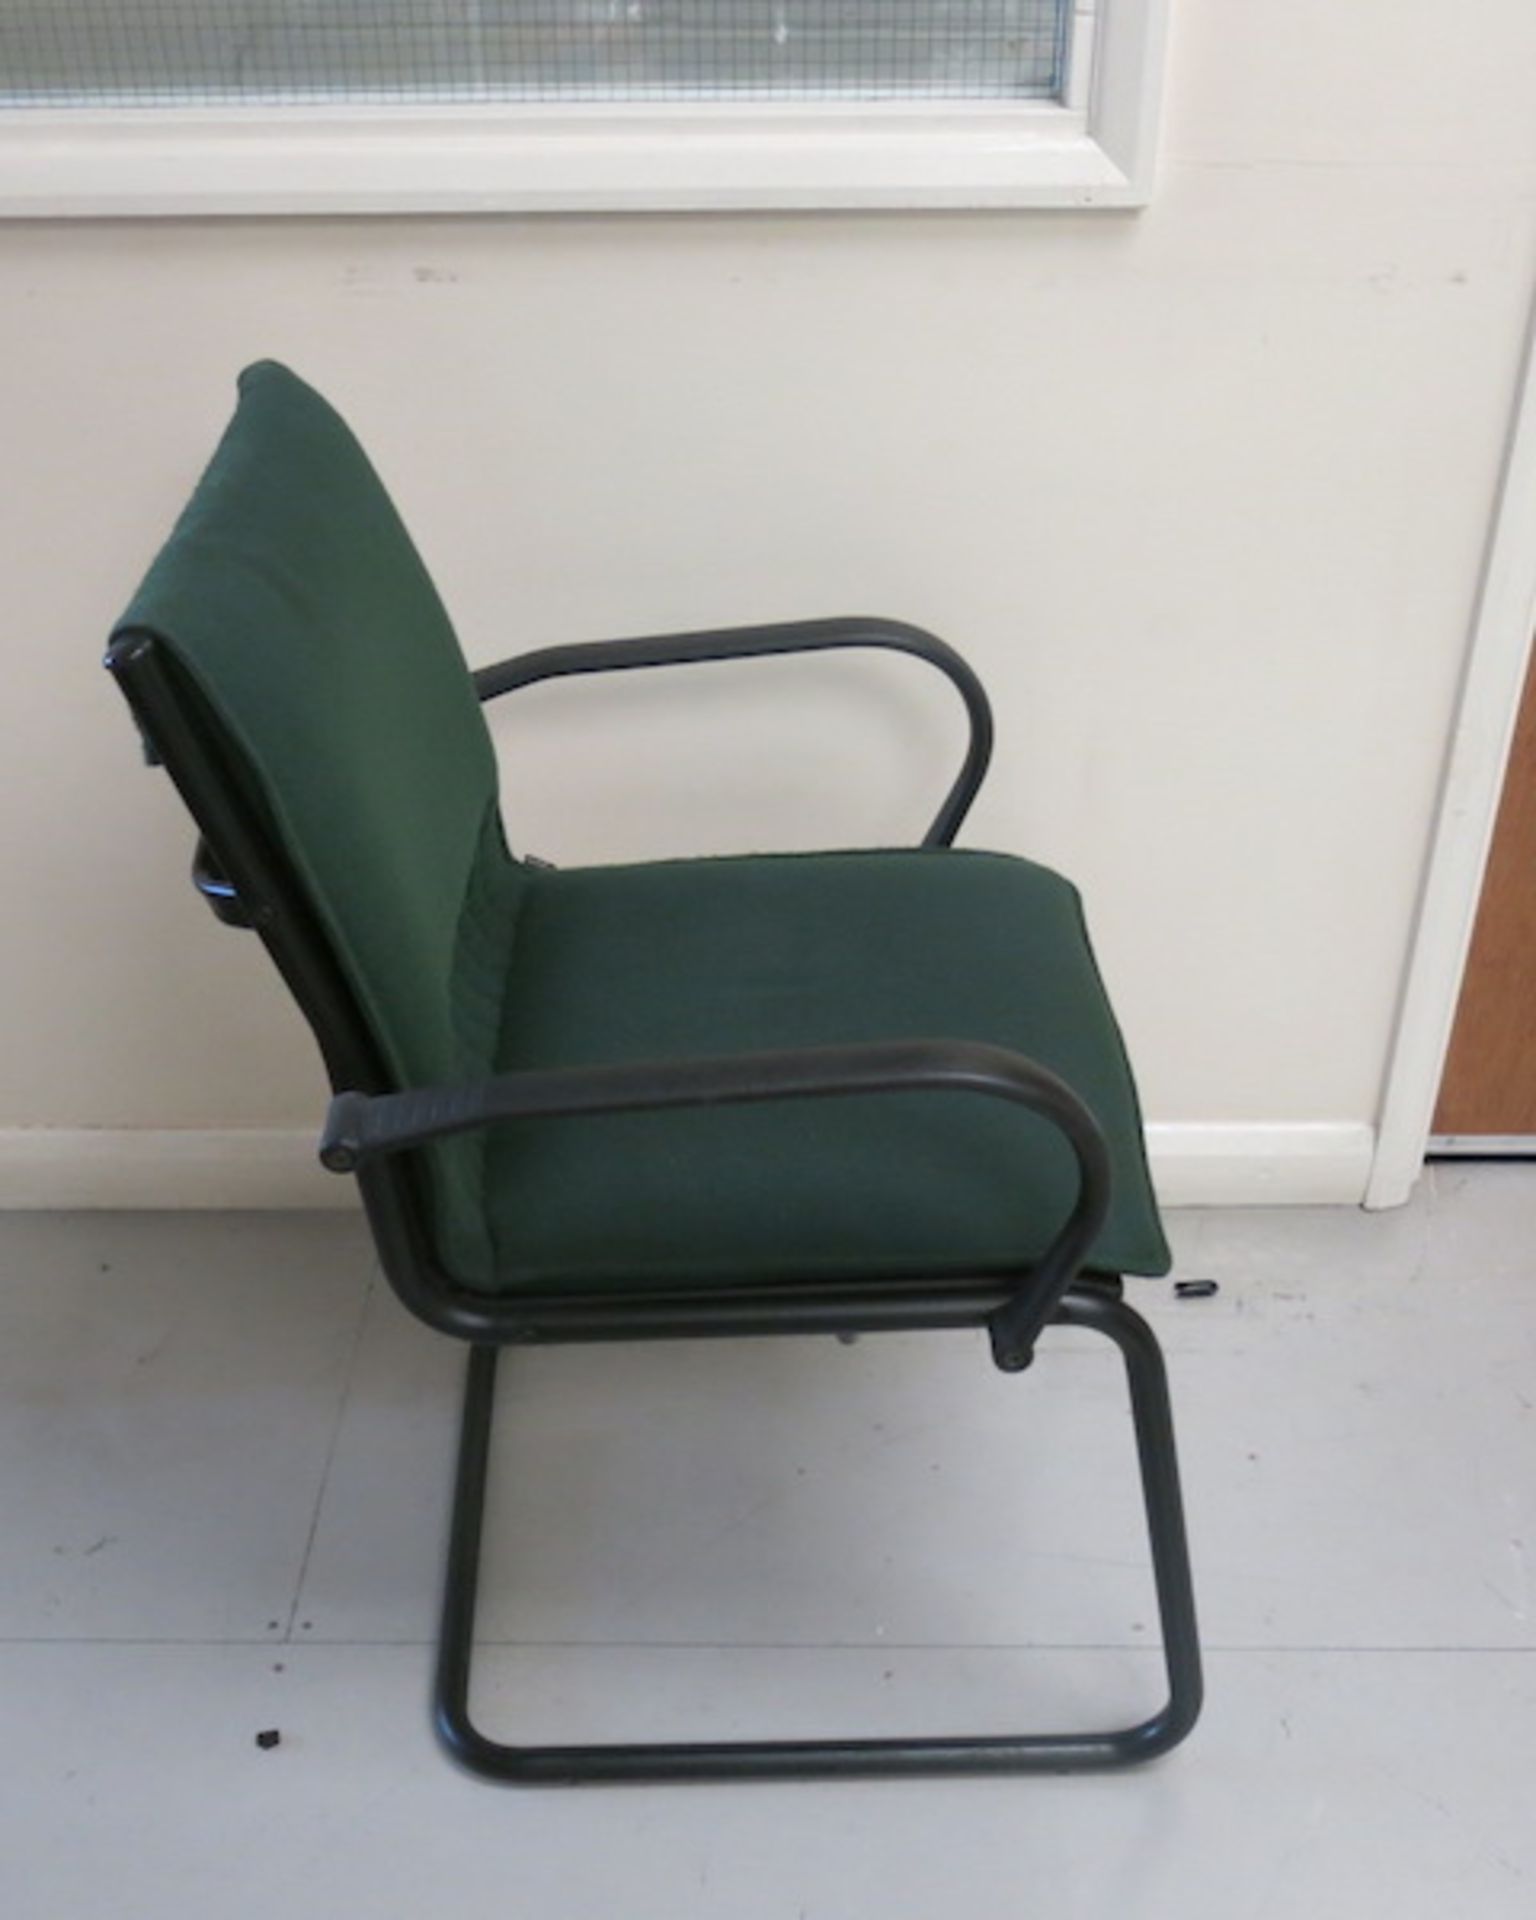 8 x Bottle Green Cantilever Meeting Chairs - Image 4 of 4